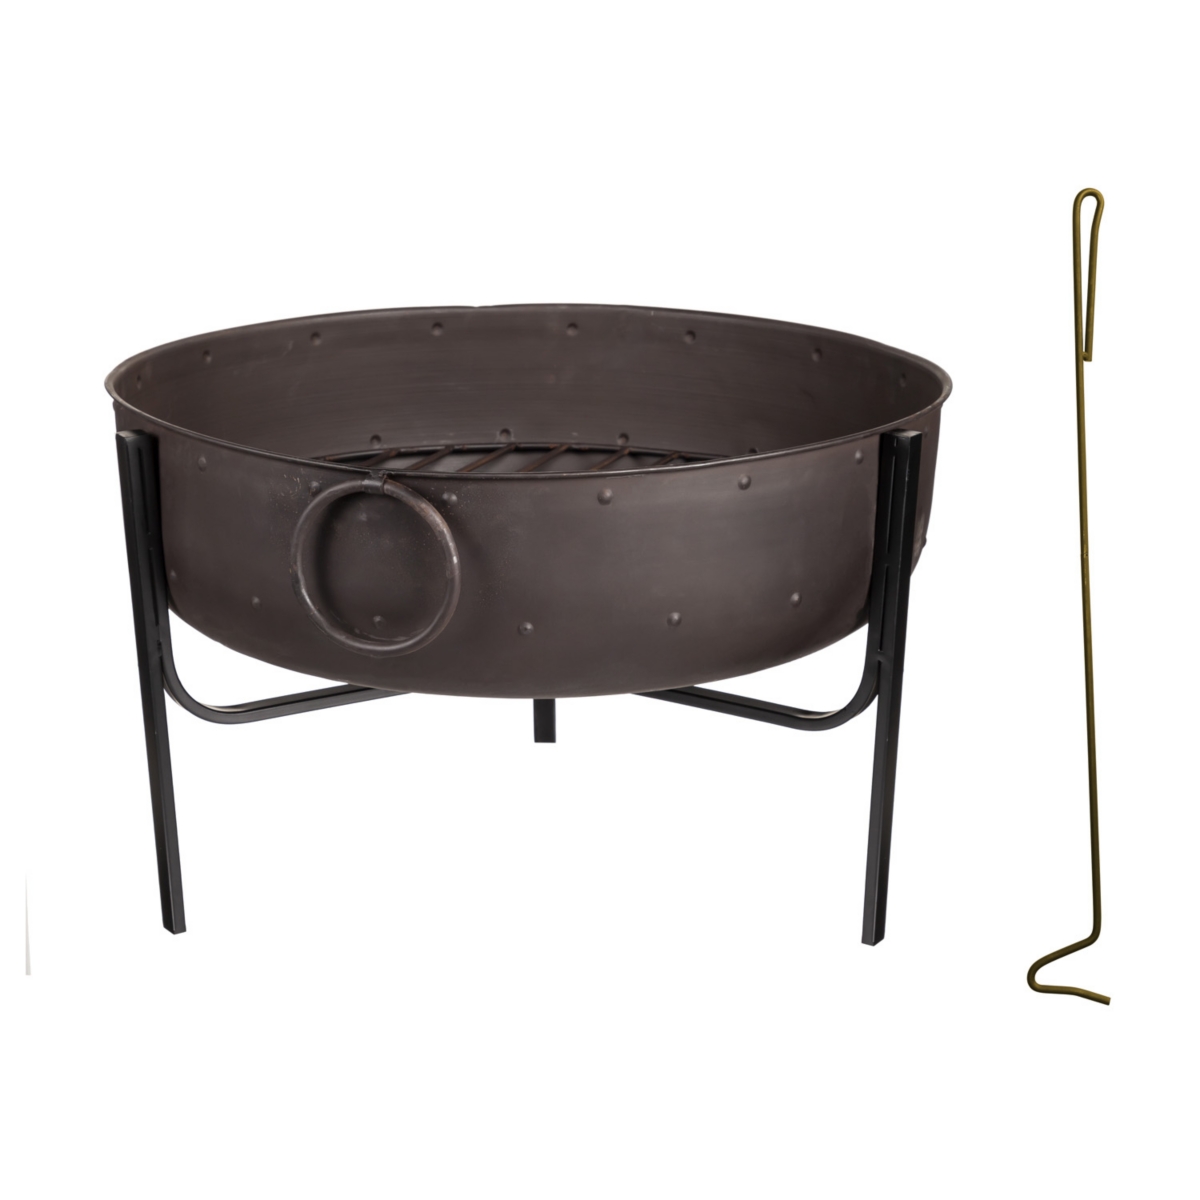 Evergreen Fire Pit With Iron Loop Handles- 24.5 X 16.5 X 24.5 Inches Outdoor Safe And Weather Resistant With L In Black